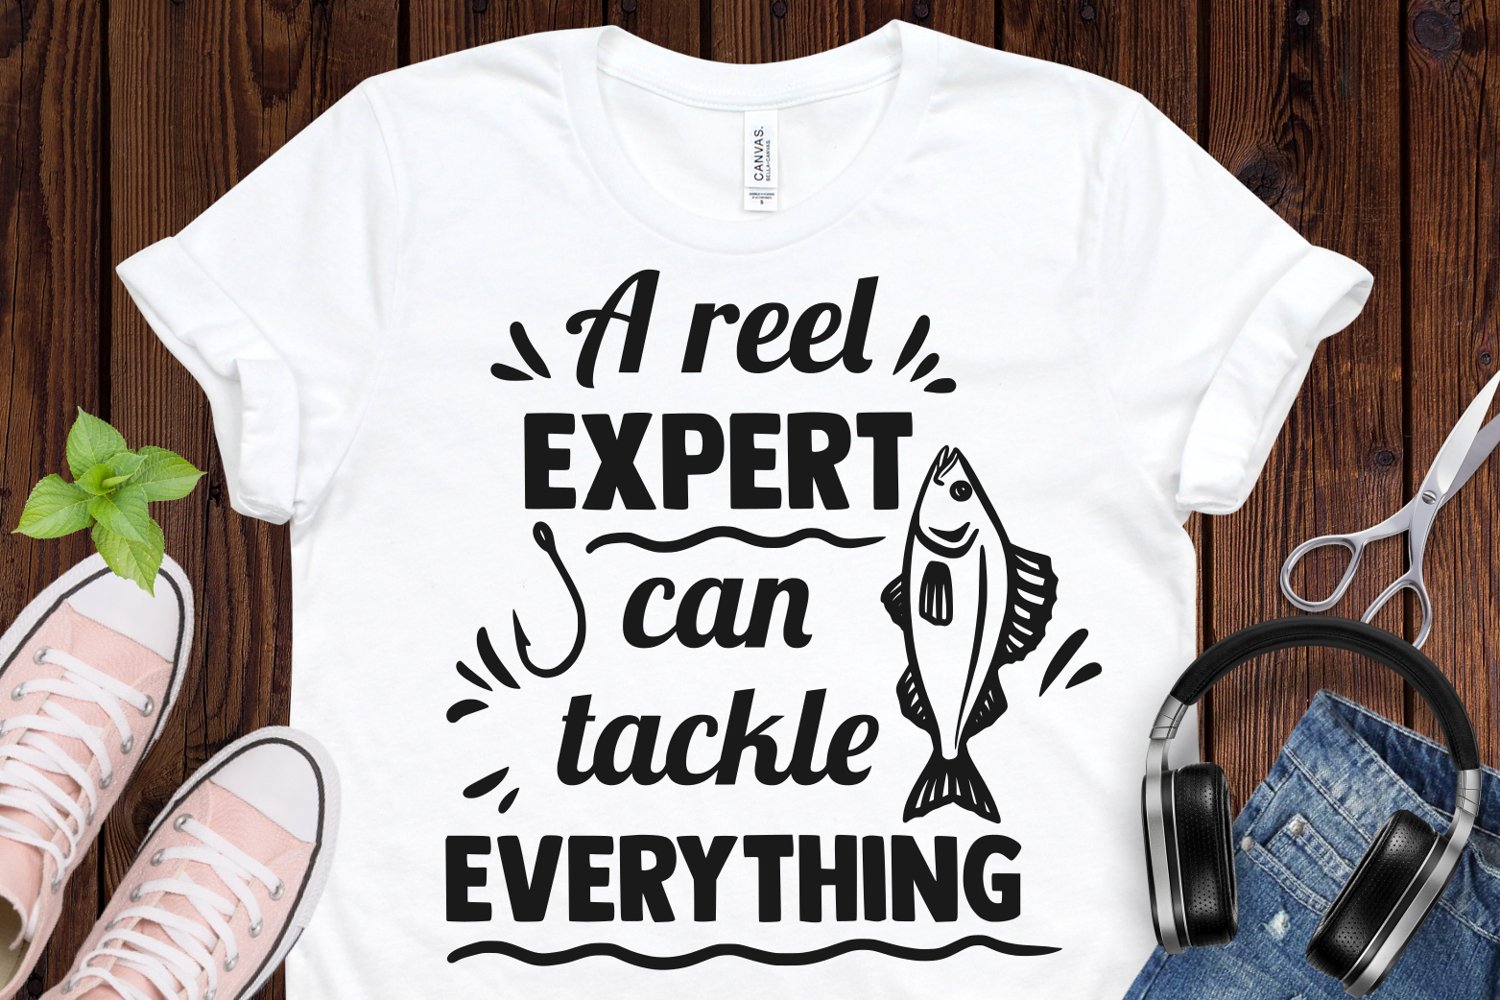 A reel expert can tackle everything.